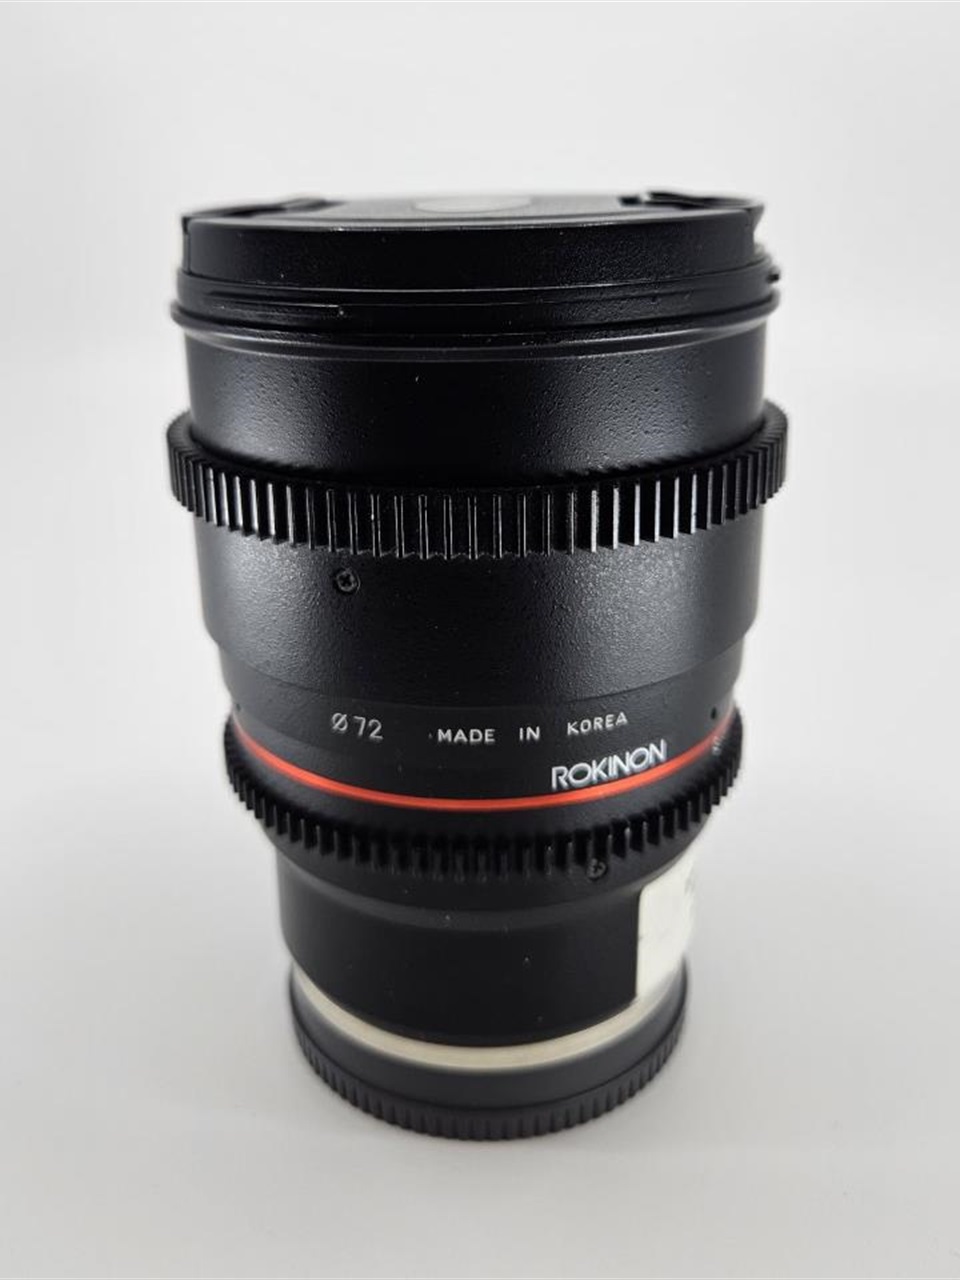 85 mm lens, not attached to camera